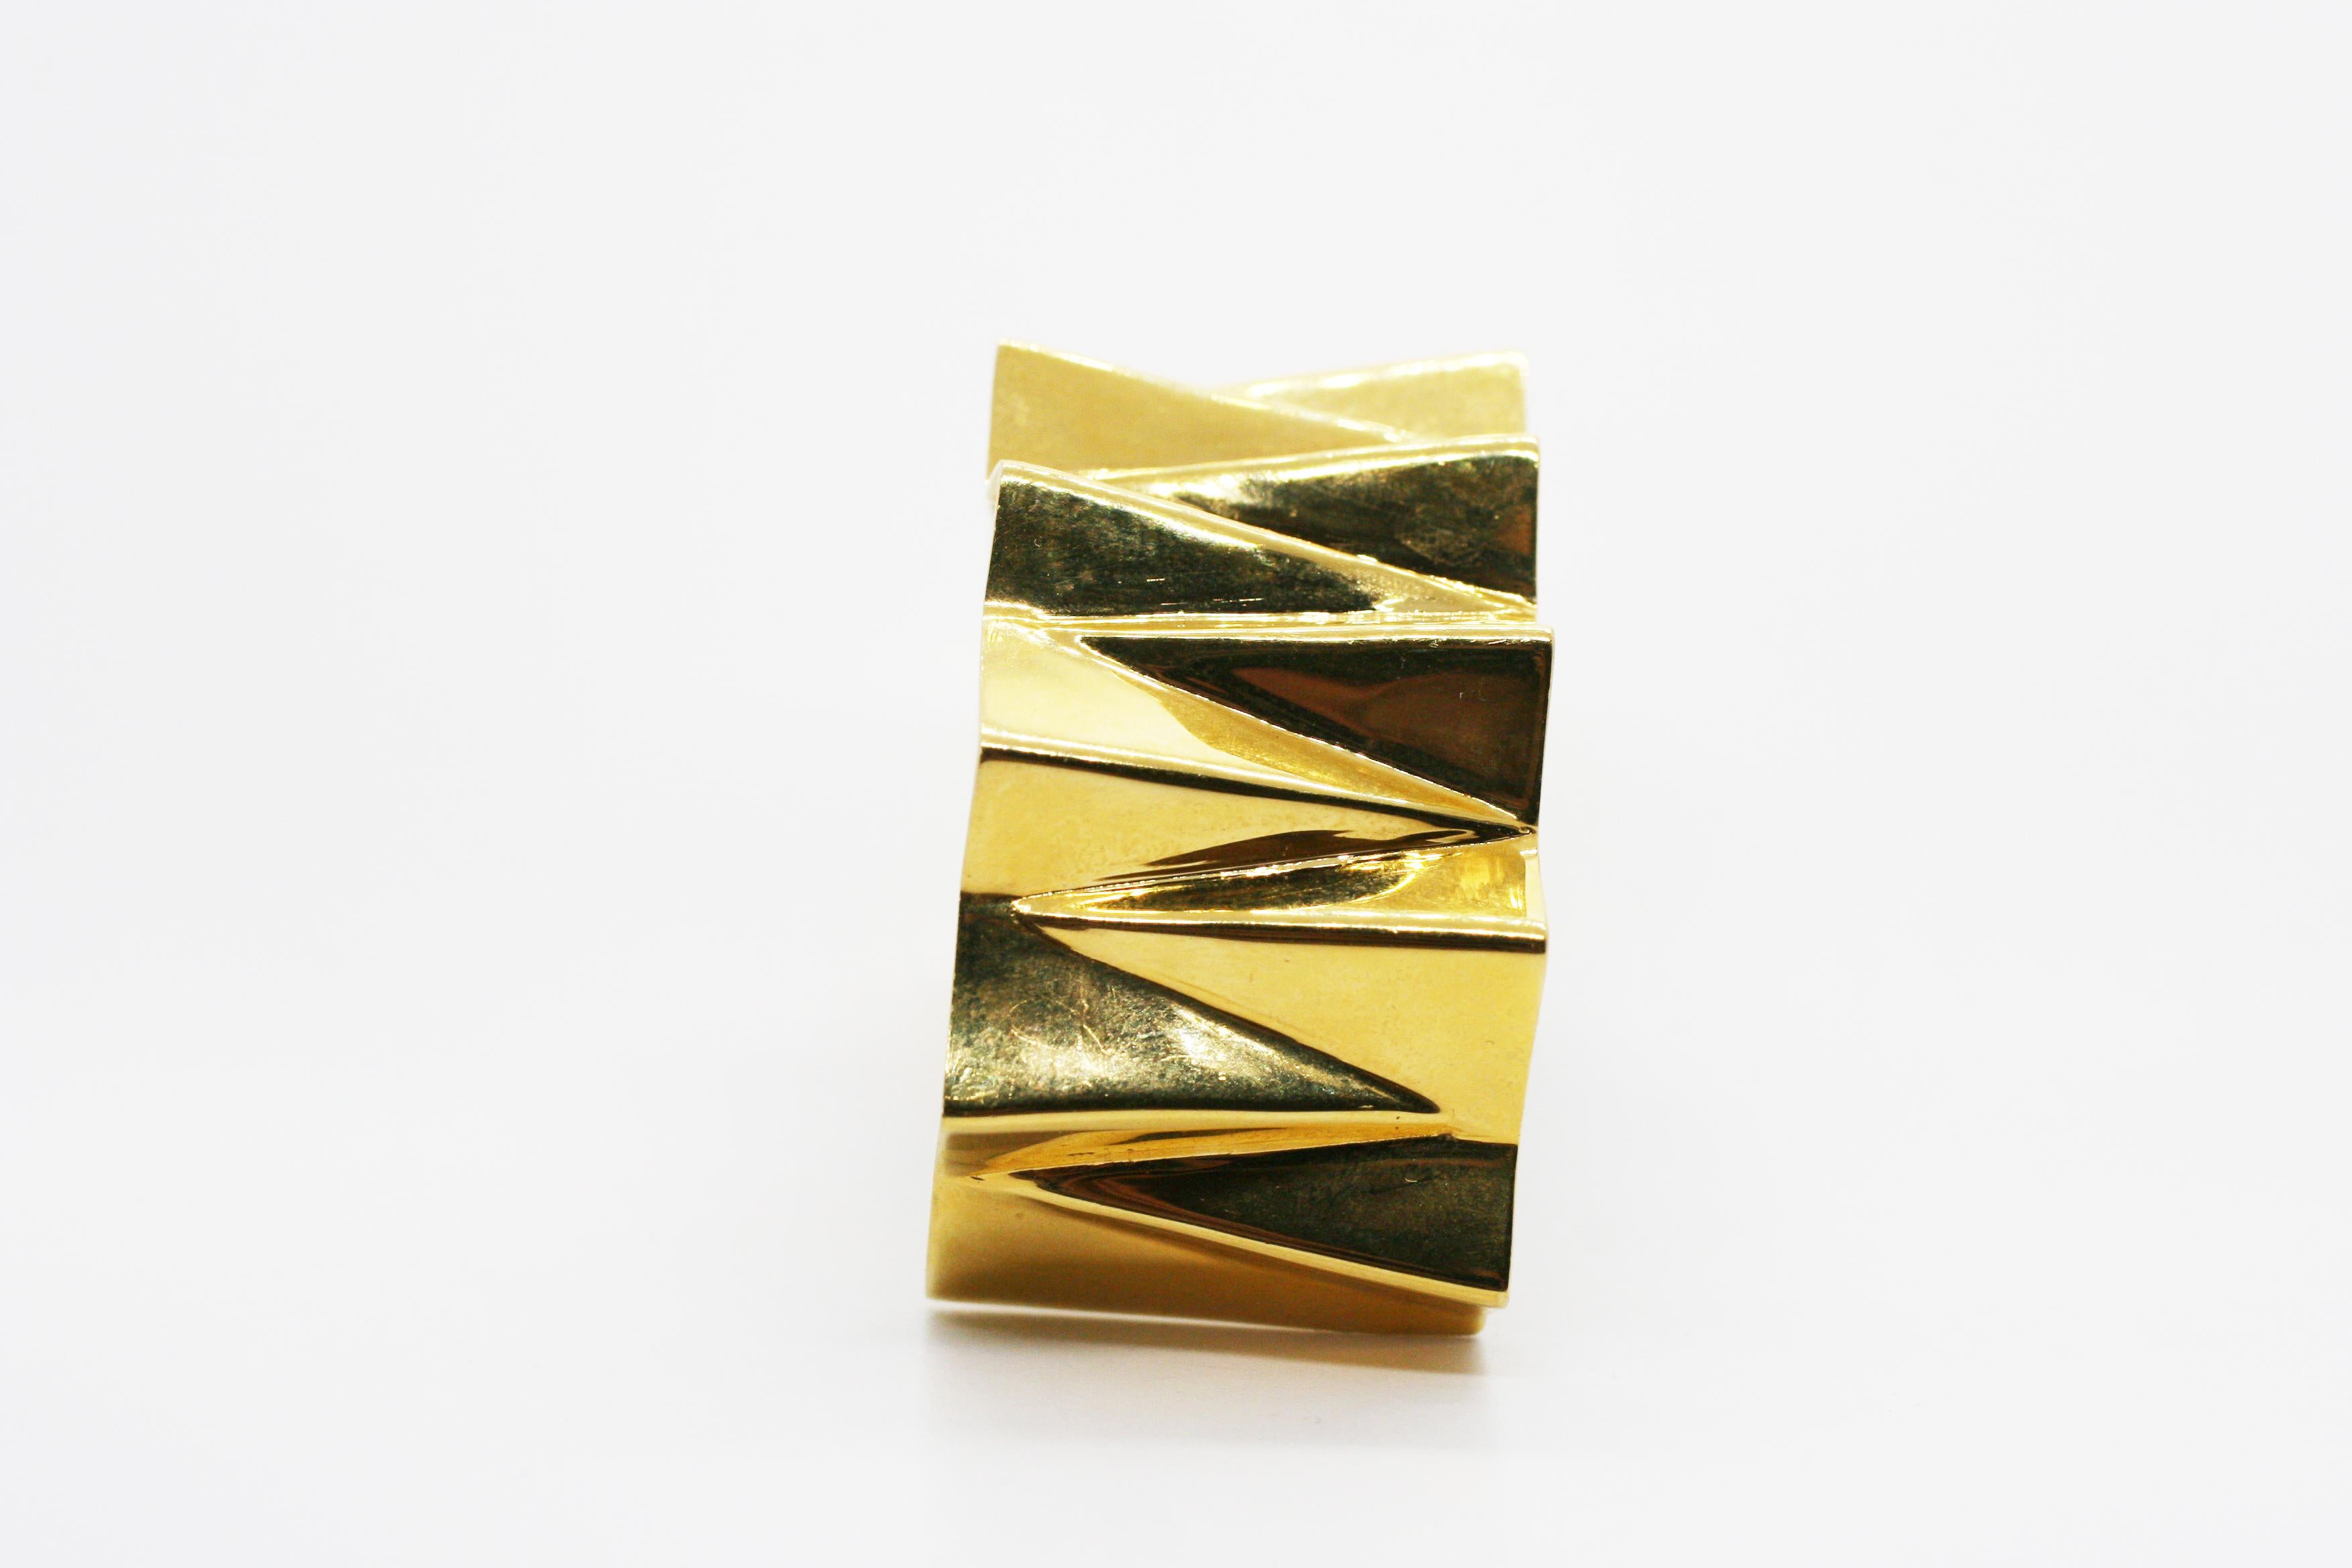 14k Gold Wide Folded Triangles Cuff features three dimensional triangles that curve over the wrist in alternating directions with an opening at the bottom to easily slide onto the wrist
Style with Perez Bitan's Sterling Silver Wide Folded Triangles